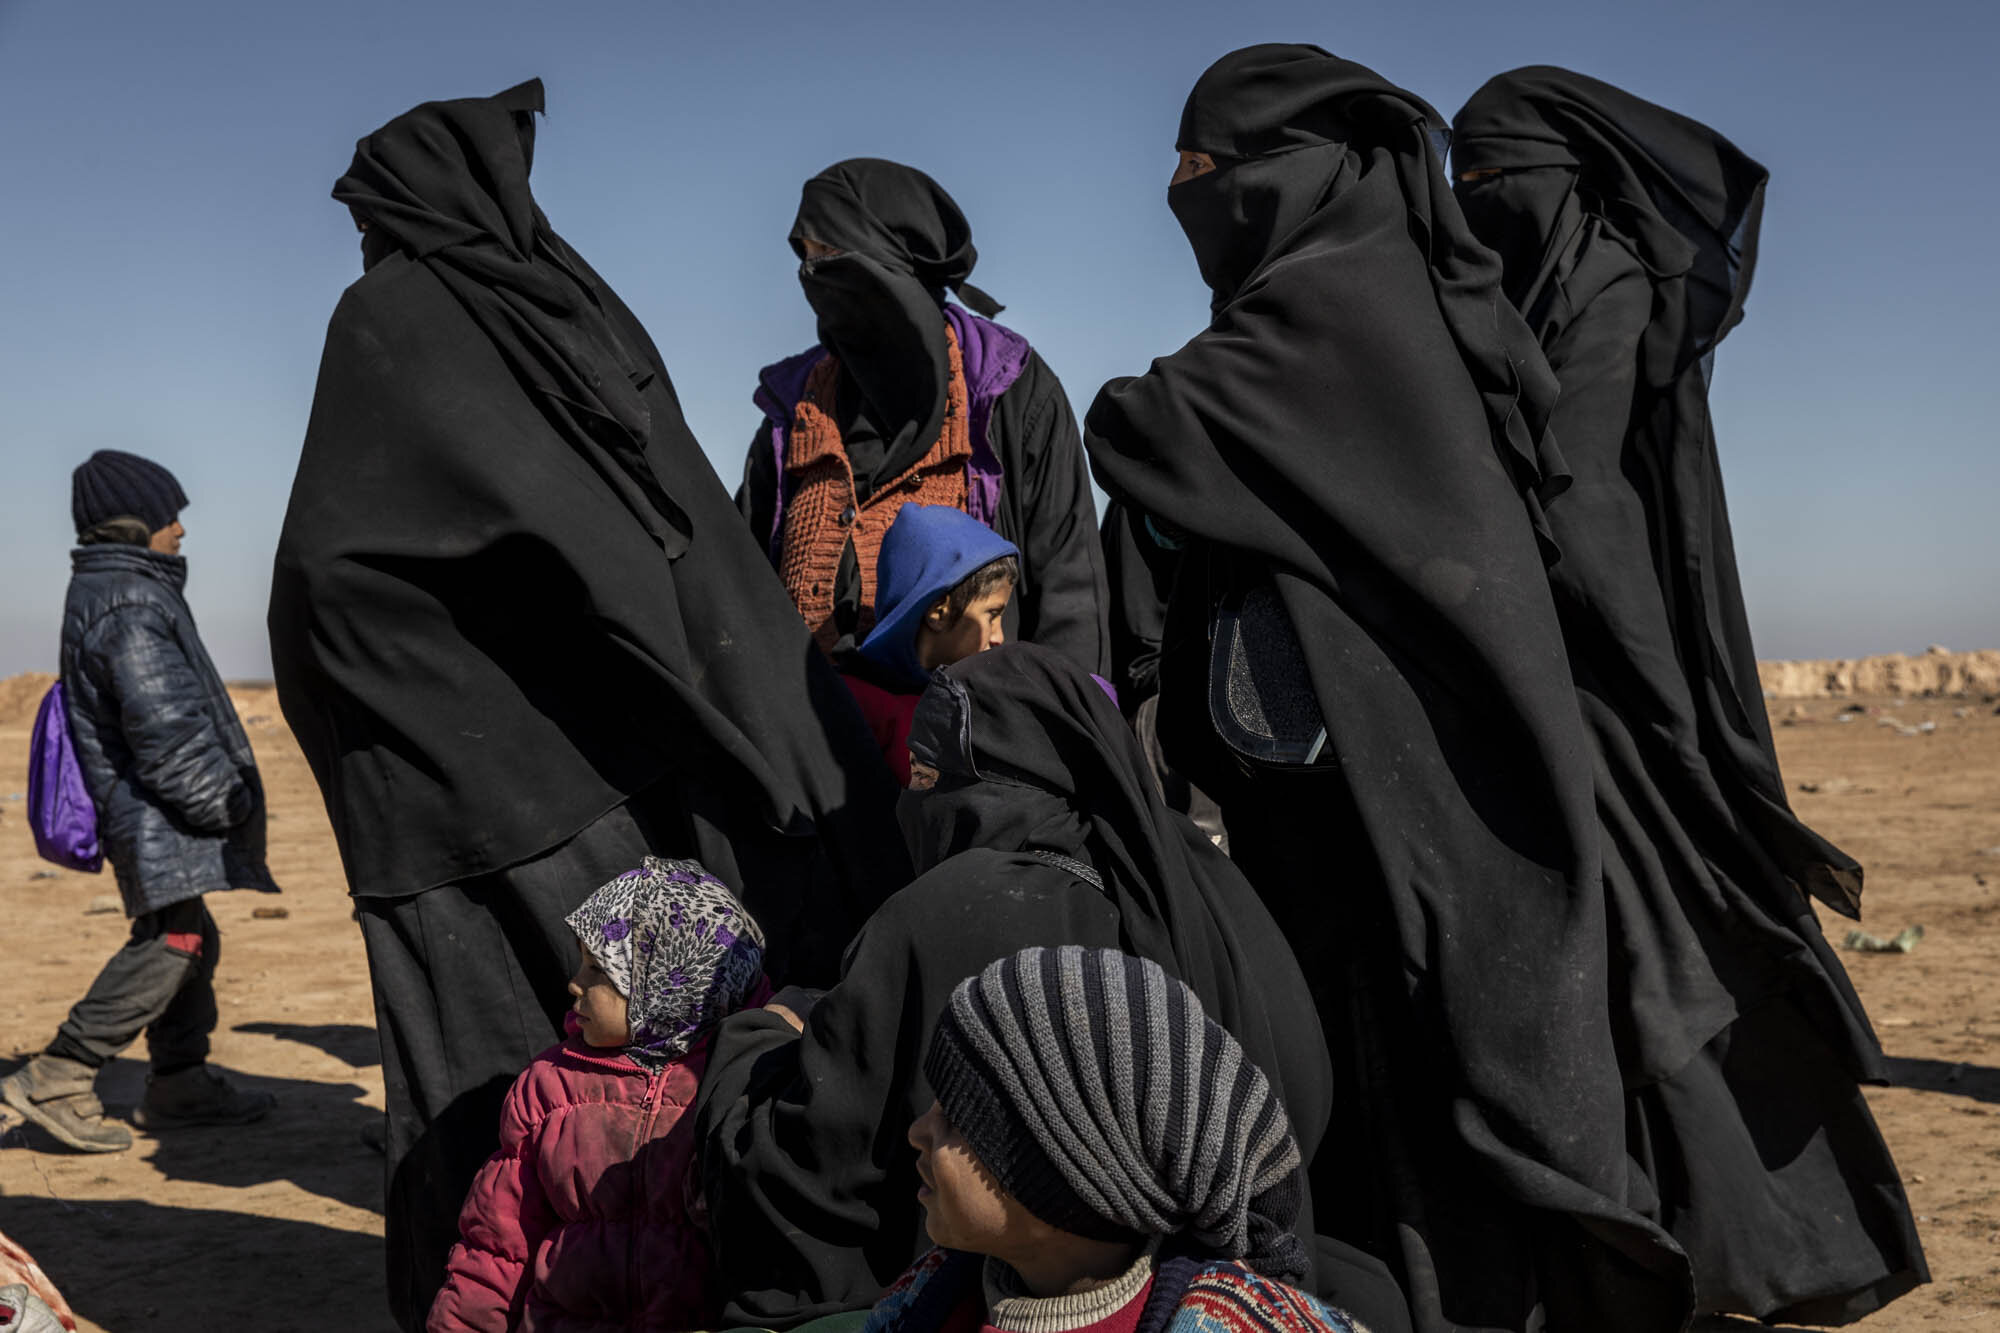  Women and children, suspected of being the wives and family members of ISIS militants, who fled the last ISIS-held area in south east Syria, waited to be screened by Kurdish and coalition forces at a mustering point in the desert near the village of